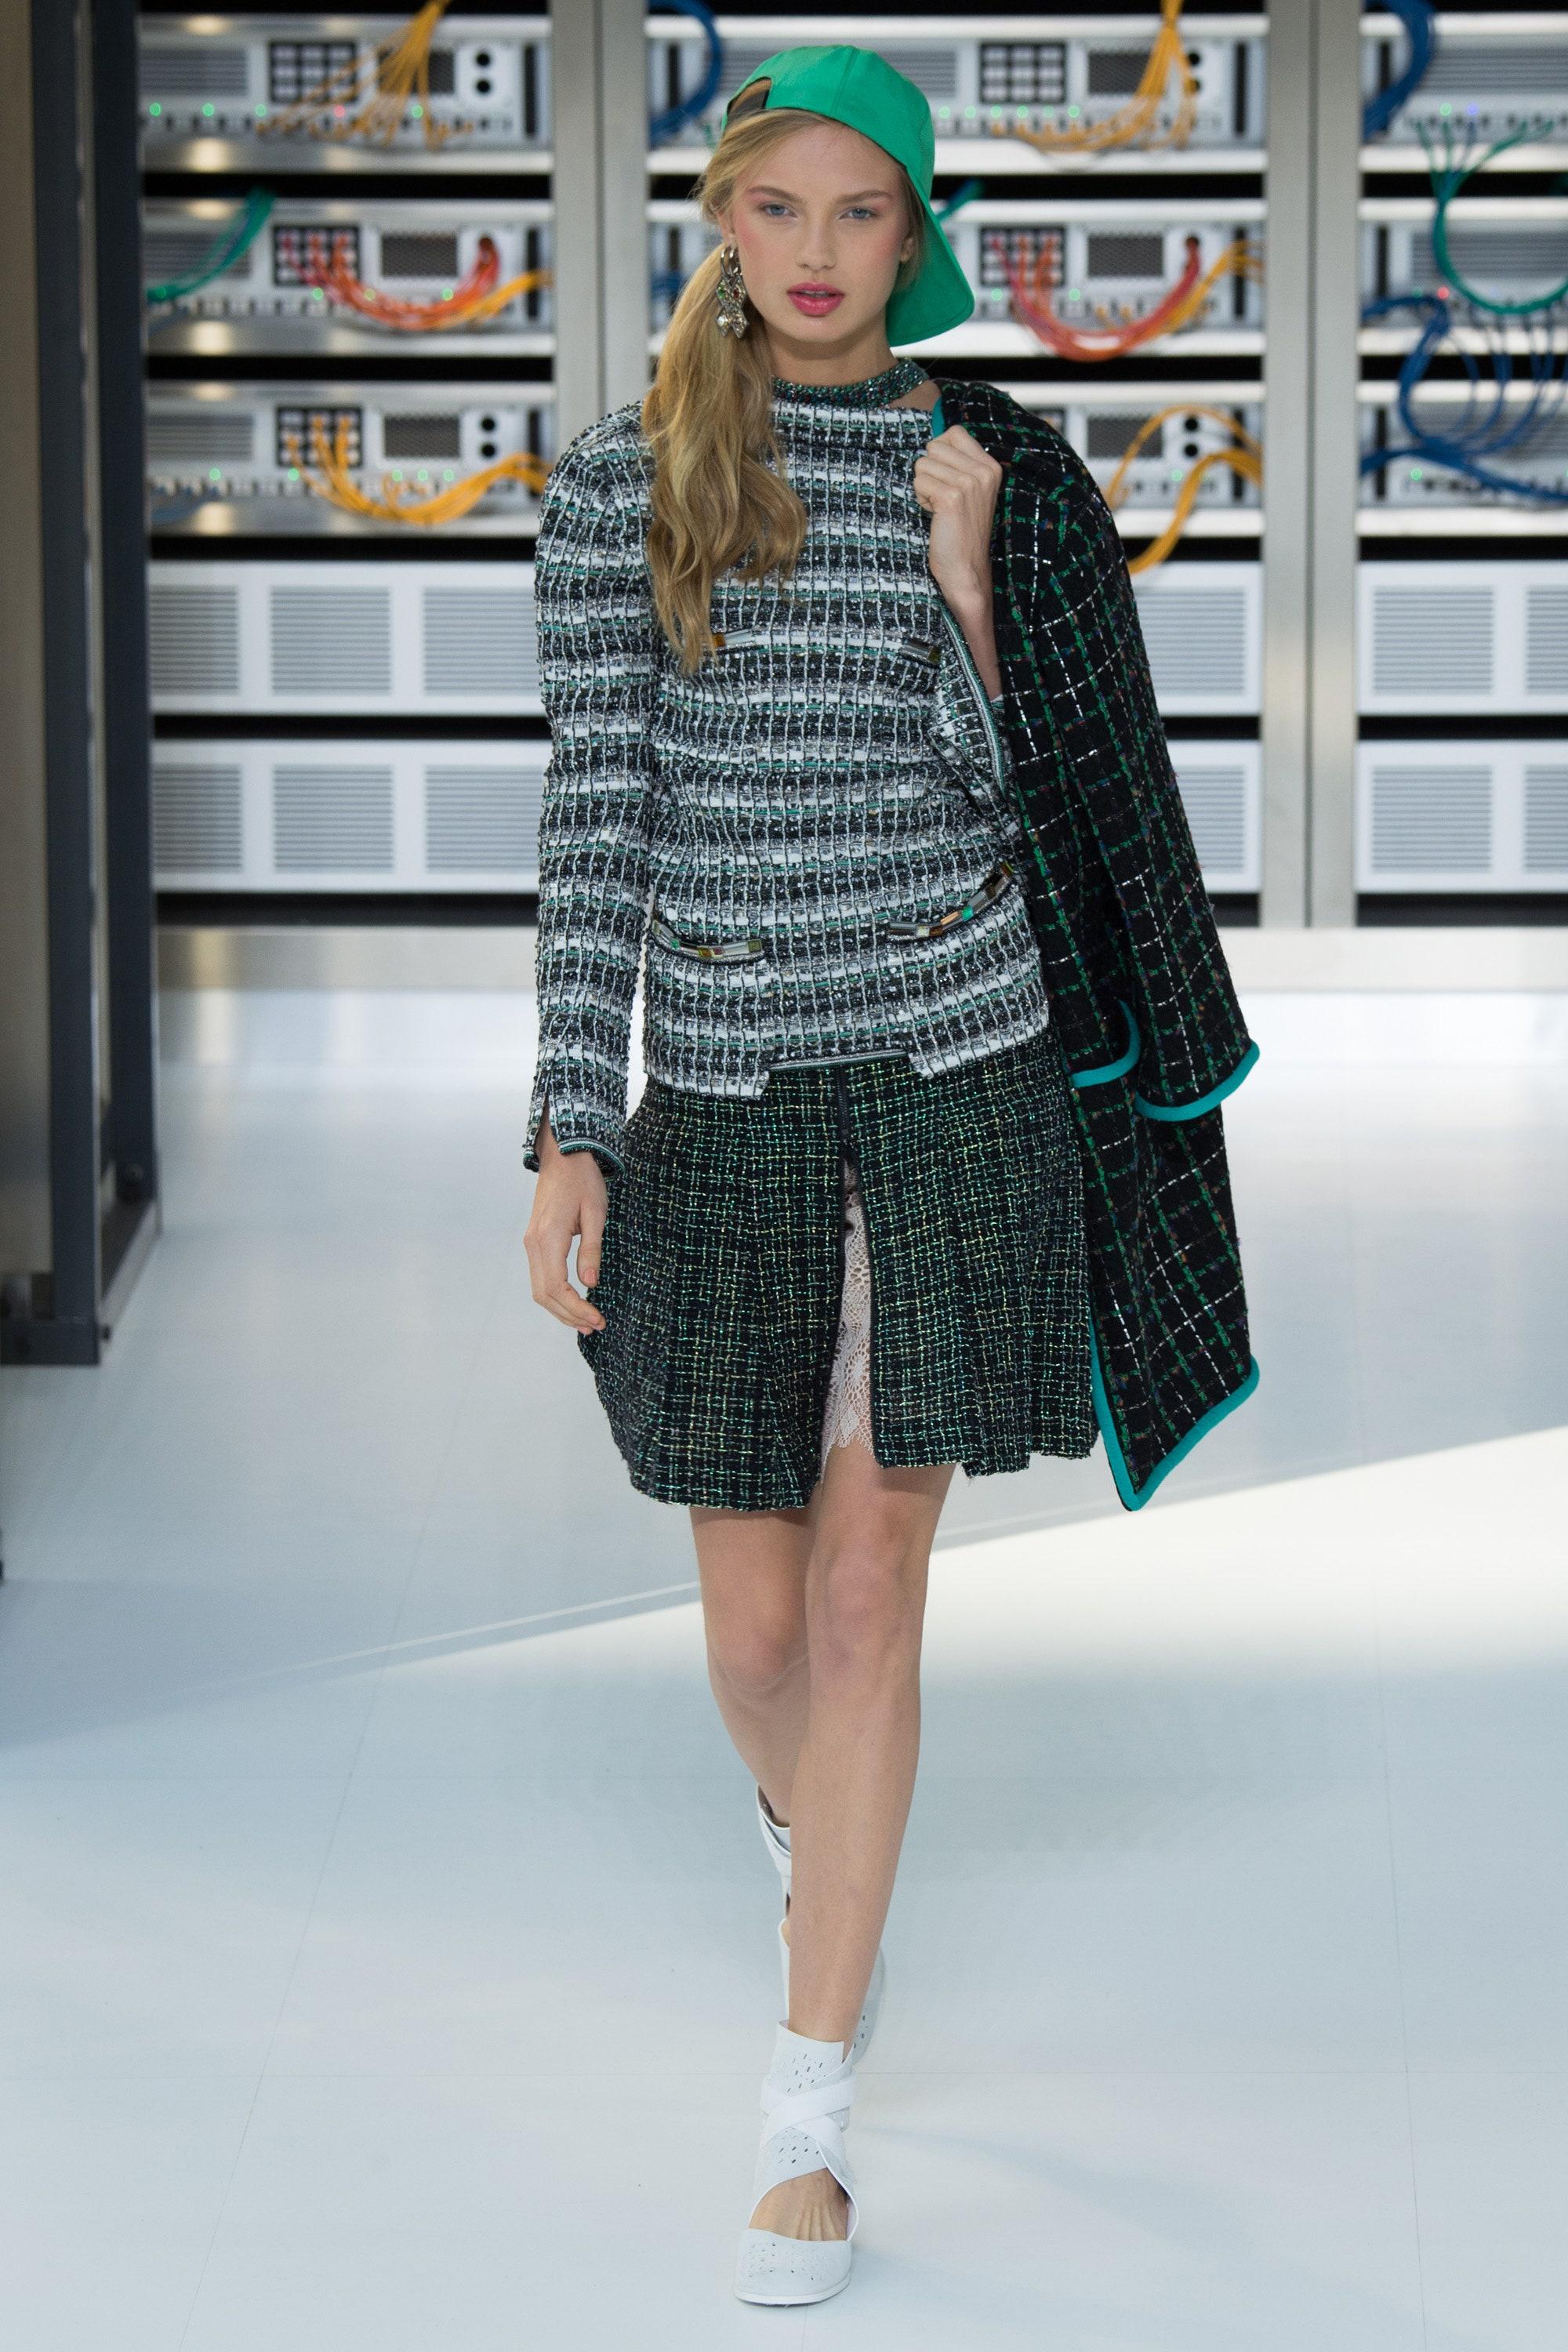 Chanel black and turquoise coat made of most precious Lesage tweed!
From Catwalk of 2017 Spring '' Data Center '' Collection, retail price over 9,000$.
- CC logo charm at side, full silk lining
SIze mark 34 FR. Kept unworn.